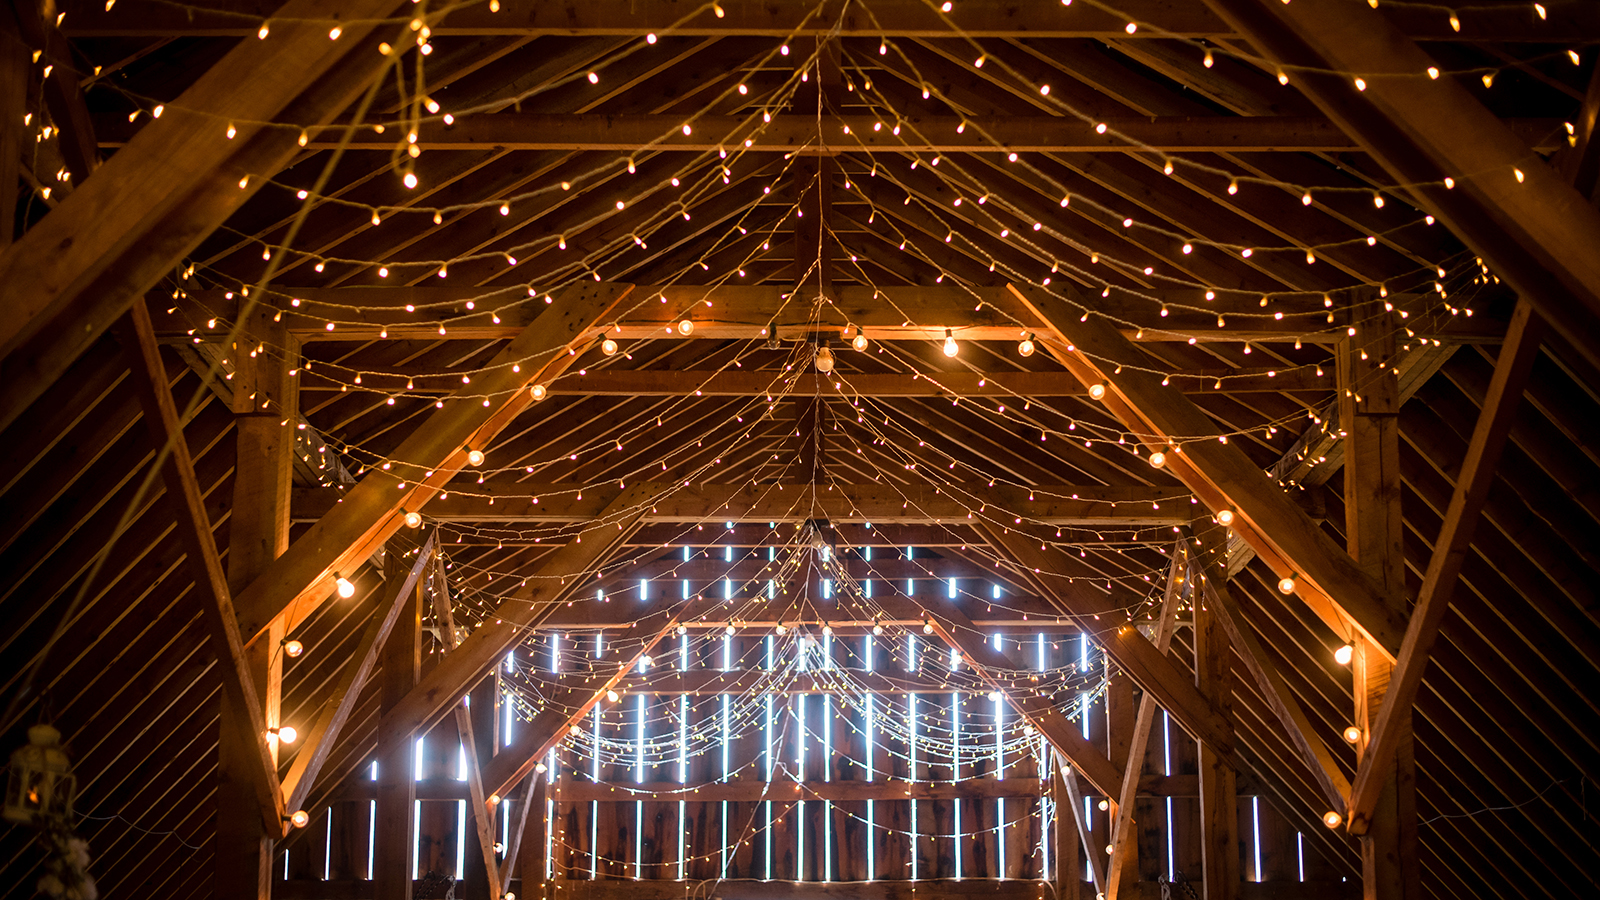 Indoor barn wedding with beautiful cafe string lighting in elegant setting to celebrate marriage of love in a rustic setting